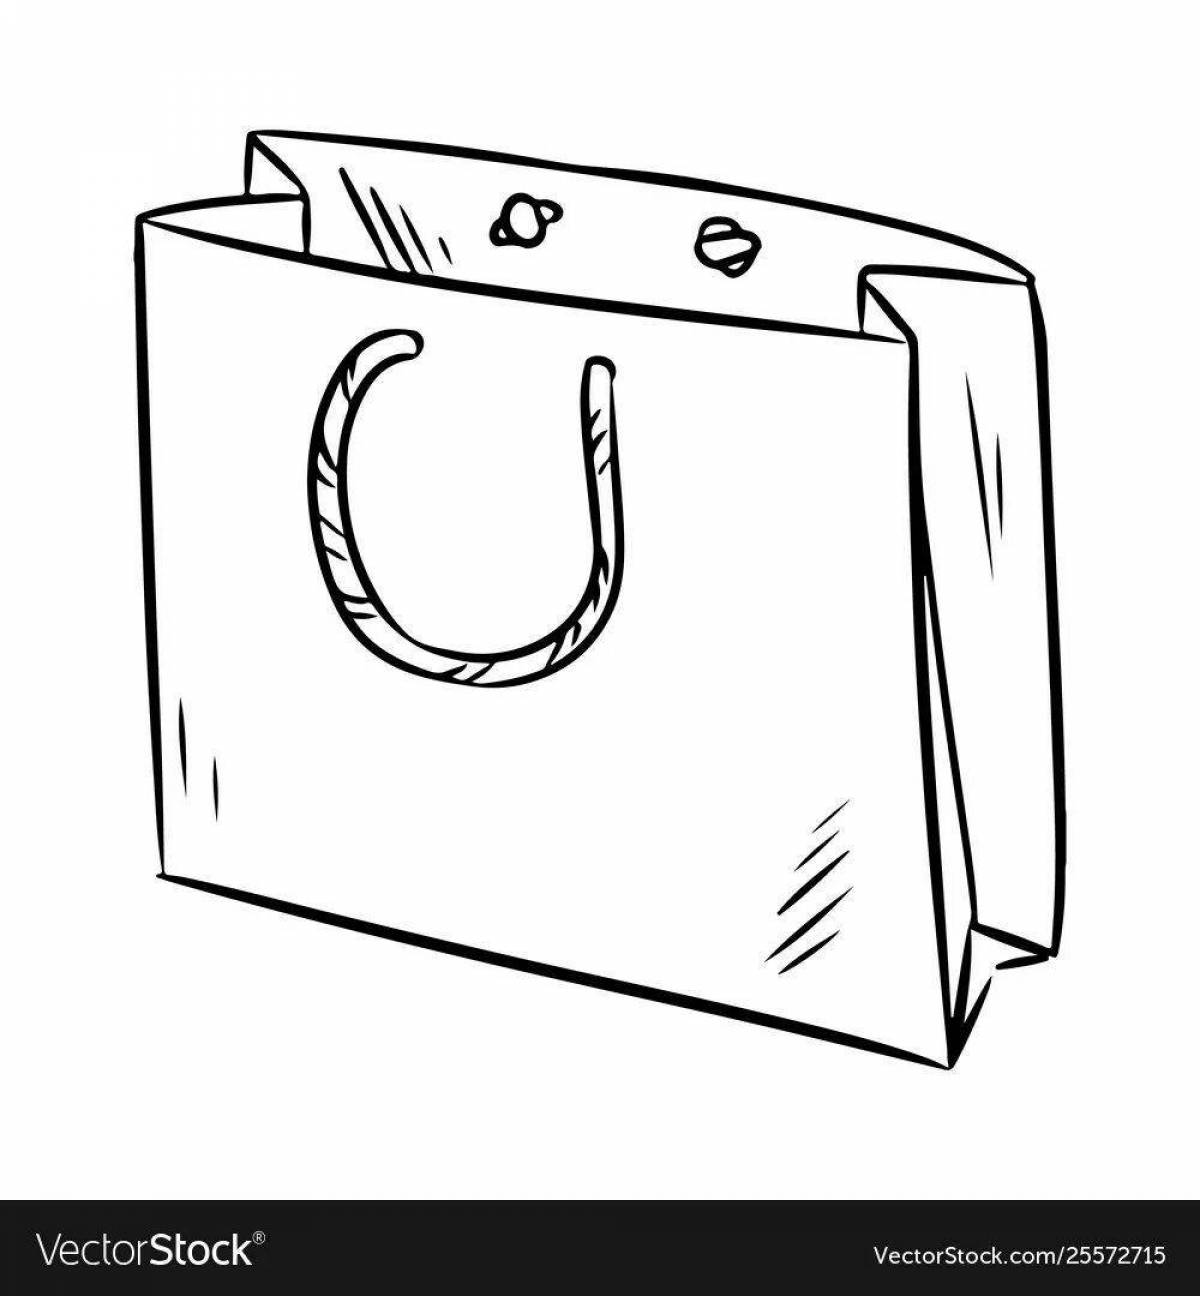 Cute sachet coloring page